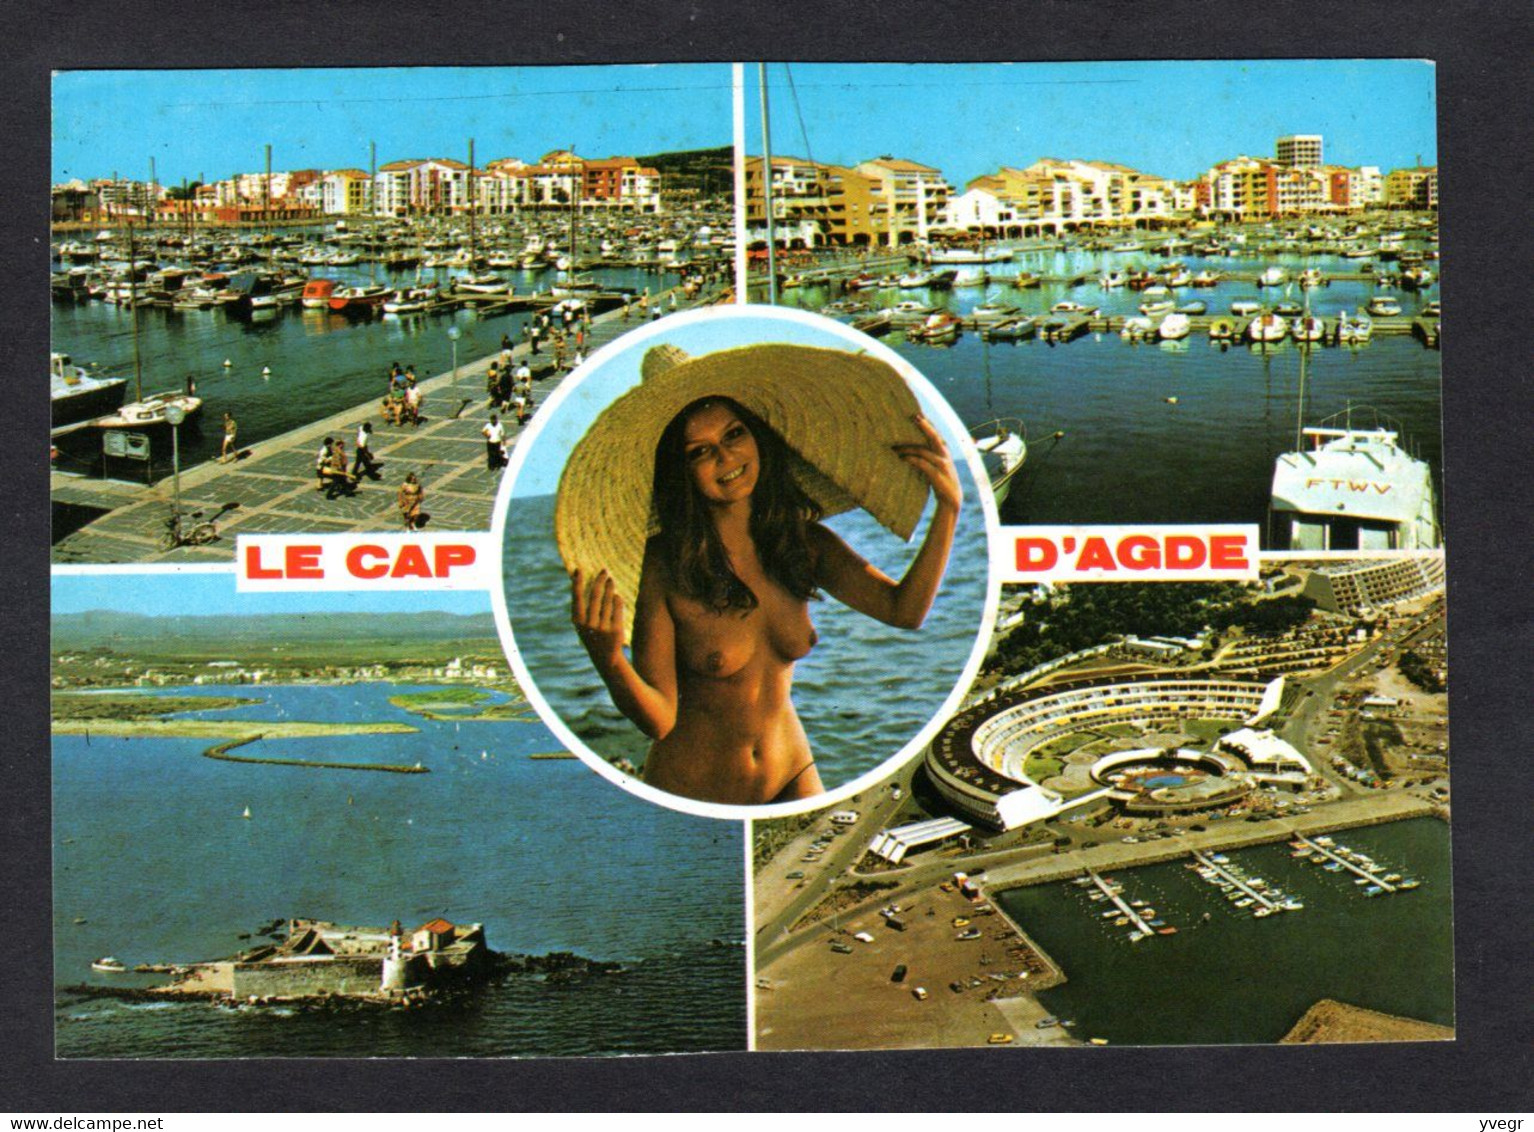 Agde picture image